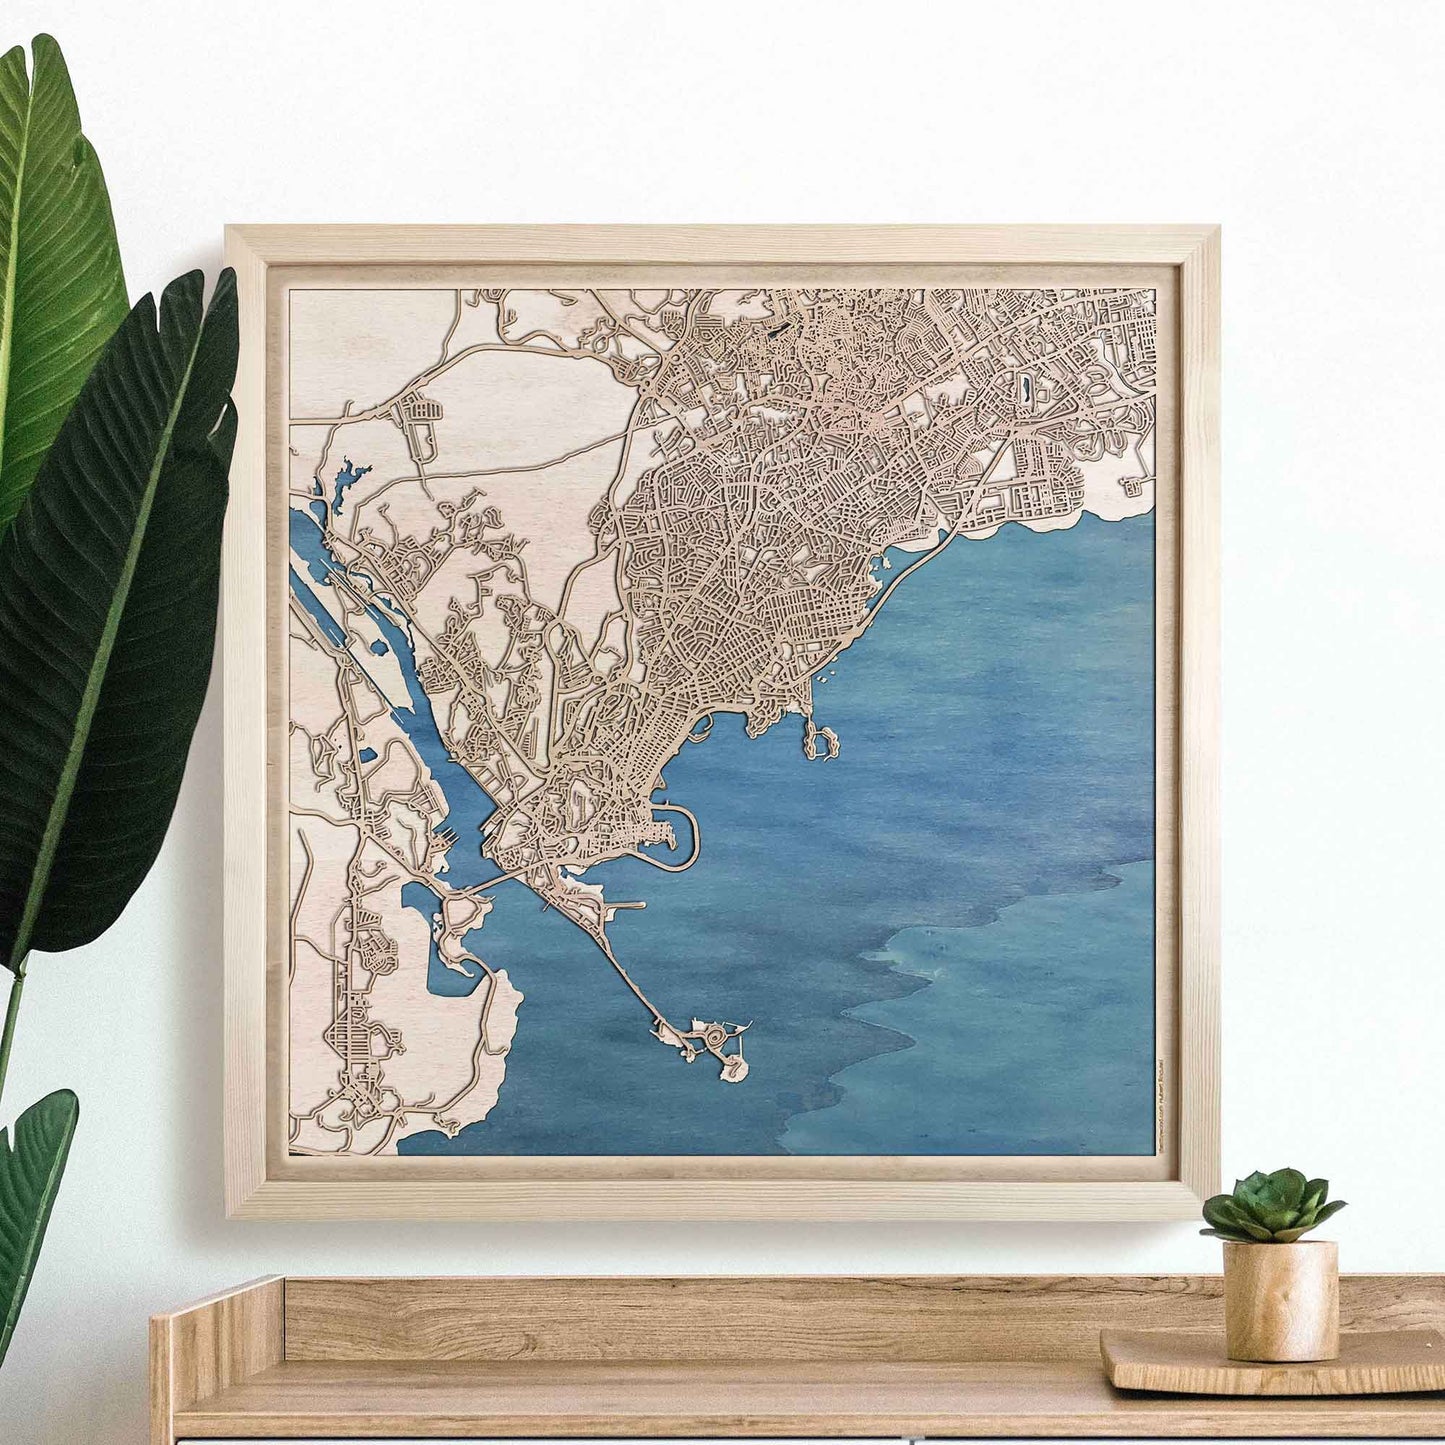 Panama Wooden Map by CityWood - Custom Wood Map Art - Unique Laser Cut Engraved - Anniversary Gift